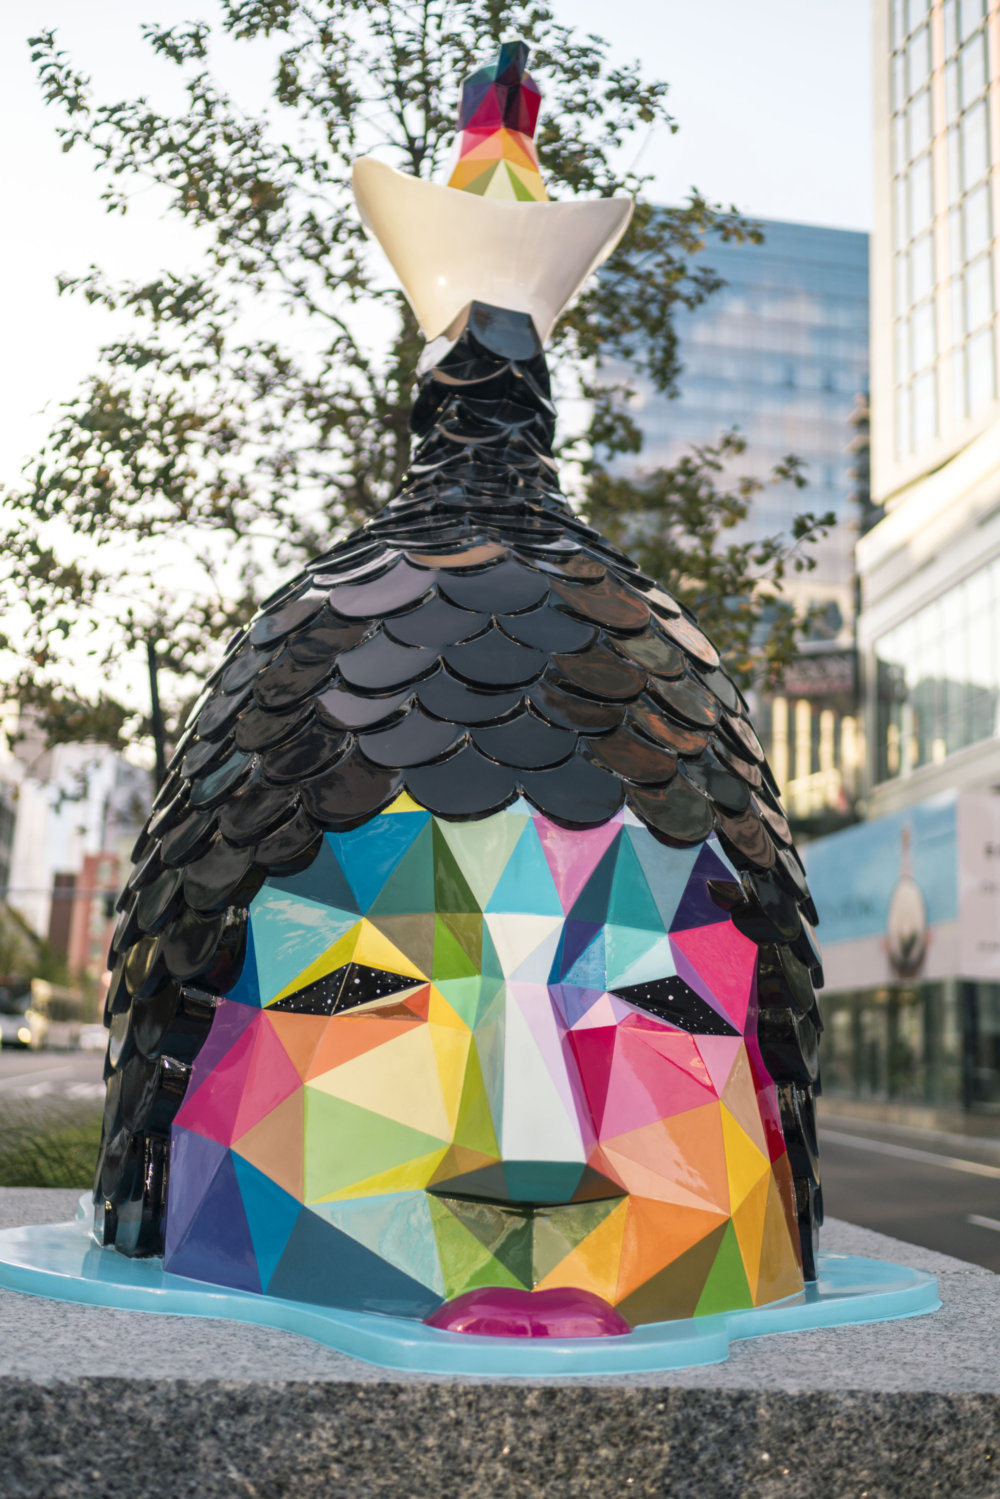 Air Sea And Land An Urban Intervention With Colorful Low Poly Sculptures By Okuda San Miguel 4